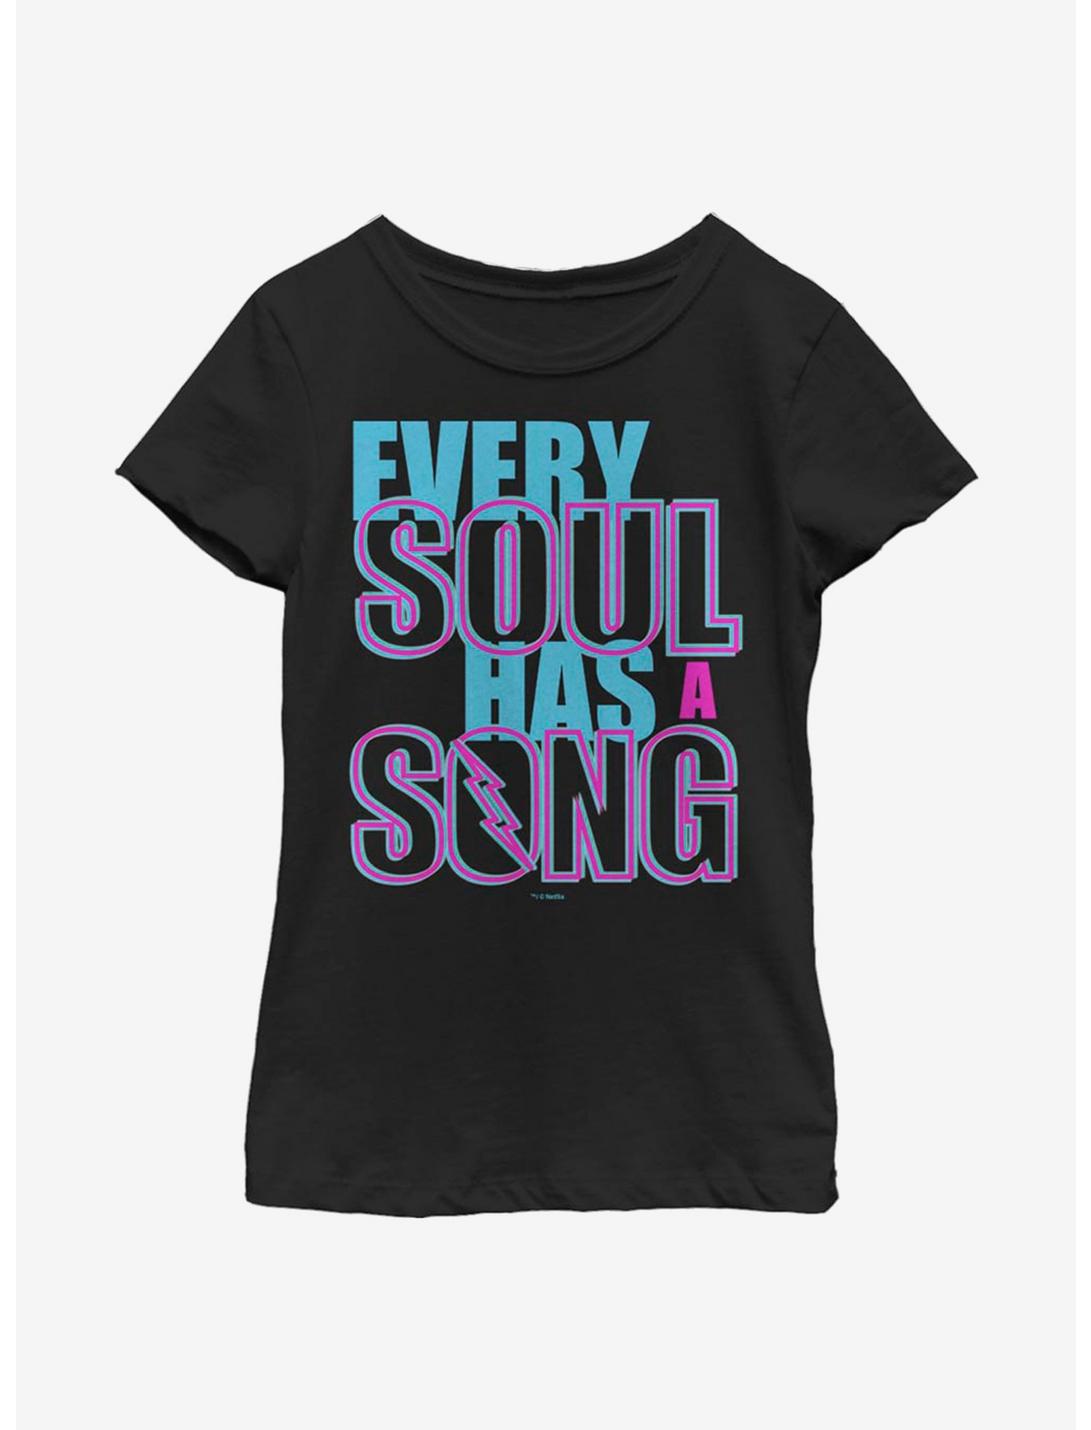 Julie And The Phantoms Soul Song Youth Girls T-Shirt, BLACK, hi-res